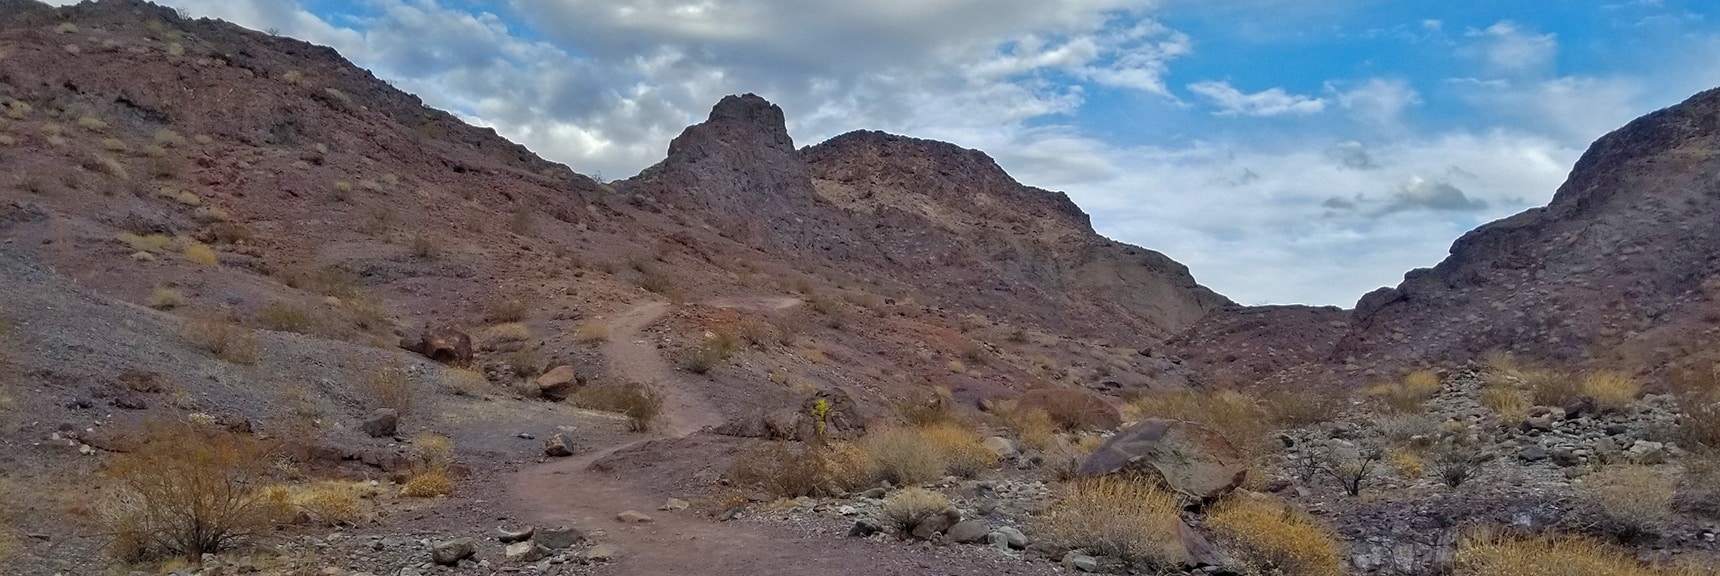 Ascending the Ridge Between Hot Springs Canyon and White Rock Canyon. | Arizona Hot Spring | Liberty Bell Arch | Lake Mead National Recreation Area, Arizona